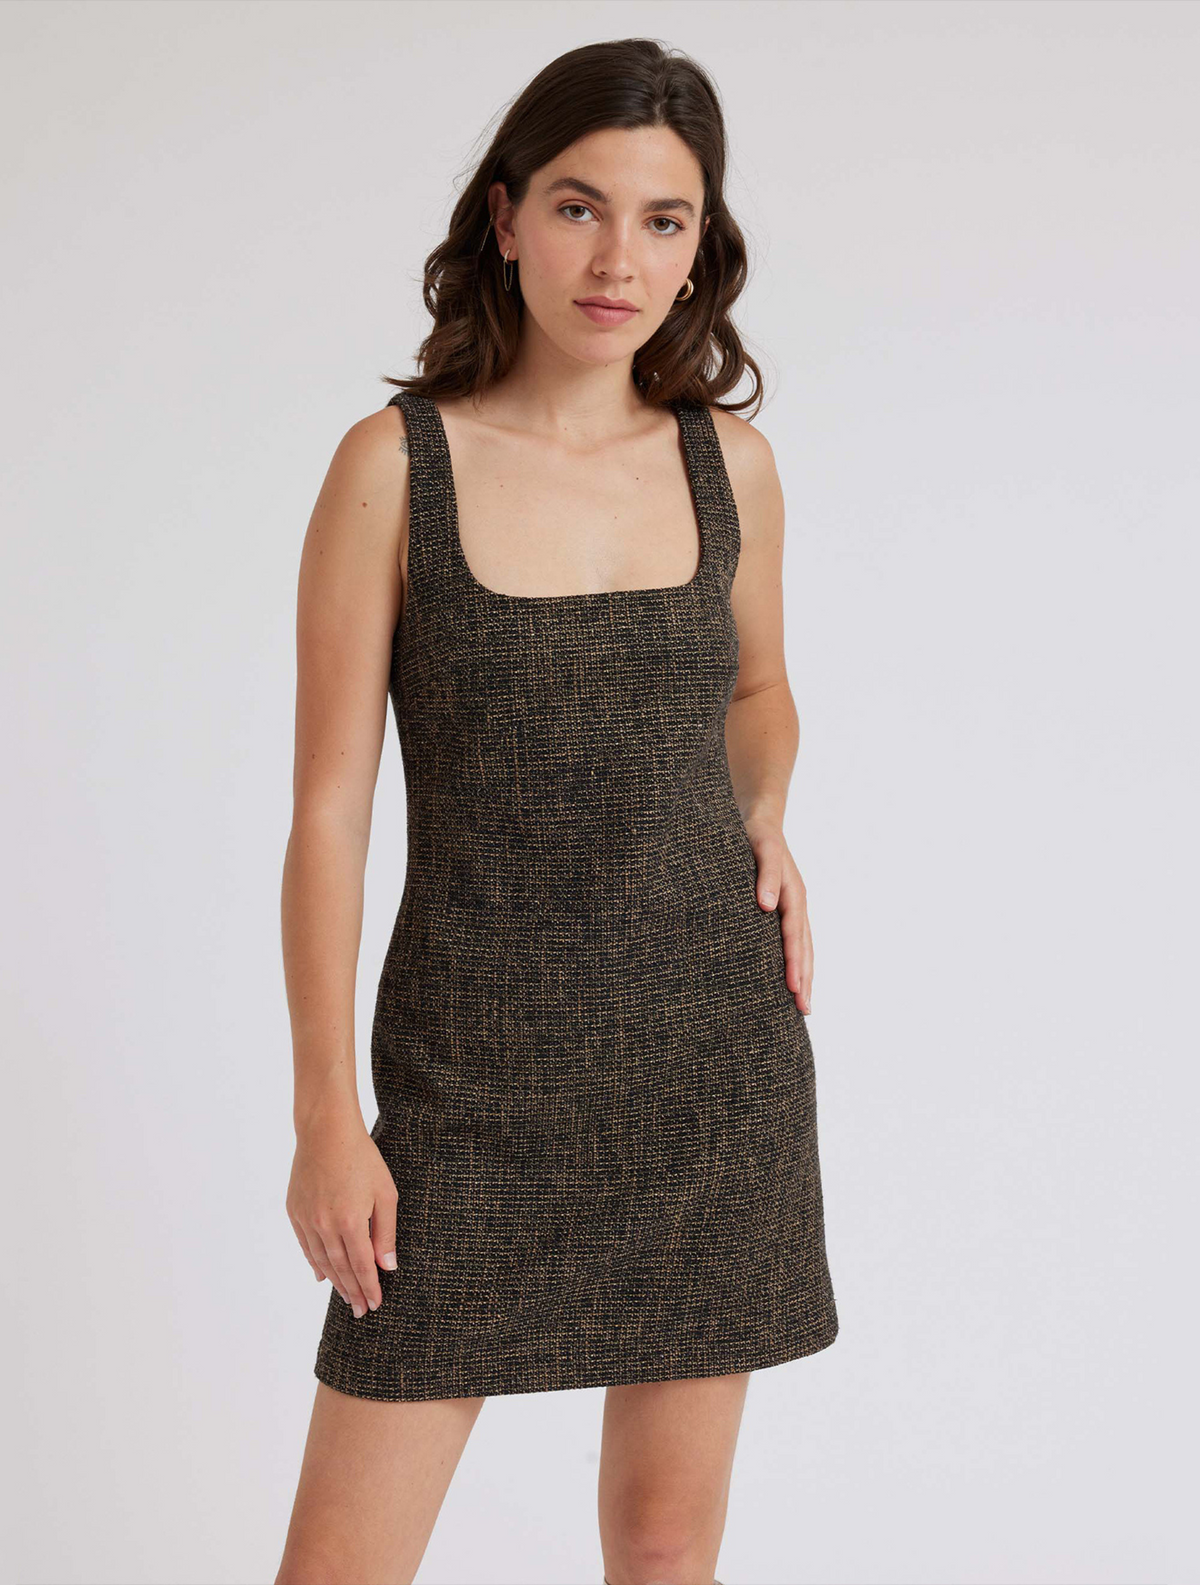 Scooped rounded square neck mini dress in black and gold boucle fabric